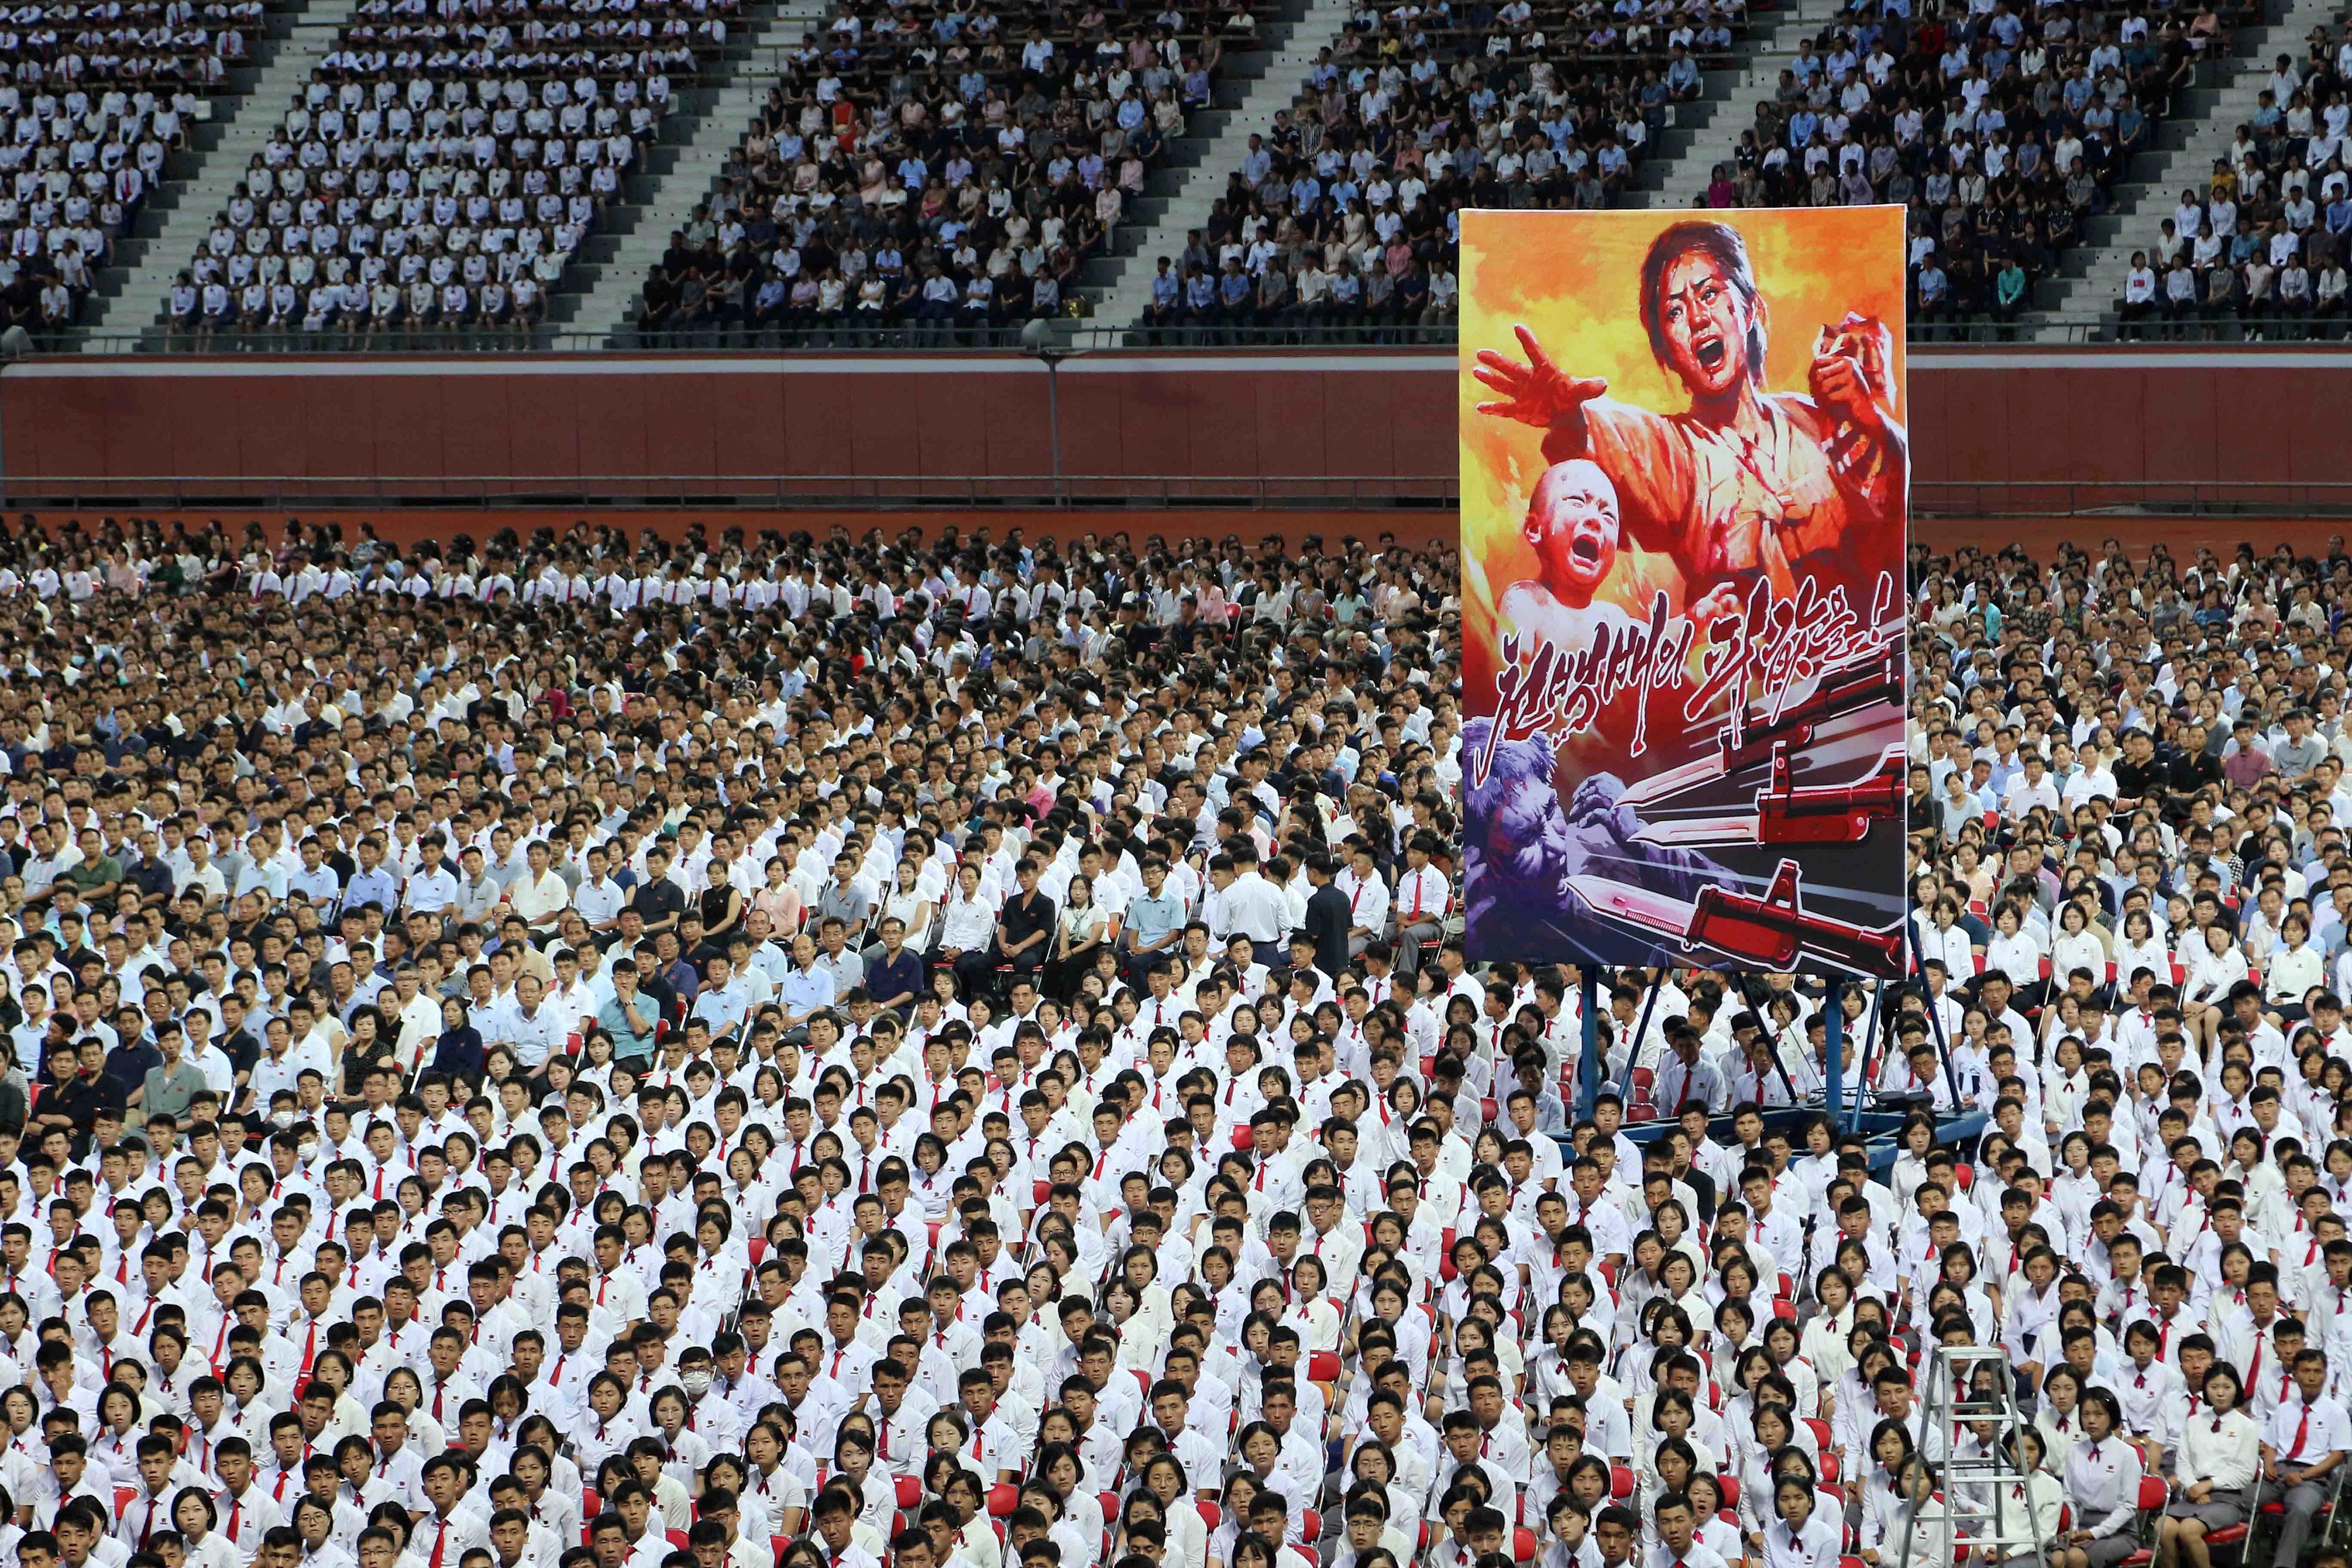 People take part in a mass rally to mark what North Korea calls "the day of struggle against U.S. imperialism" at the May Day Stadium in Pyongyang, North Korea Tuesday